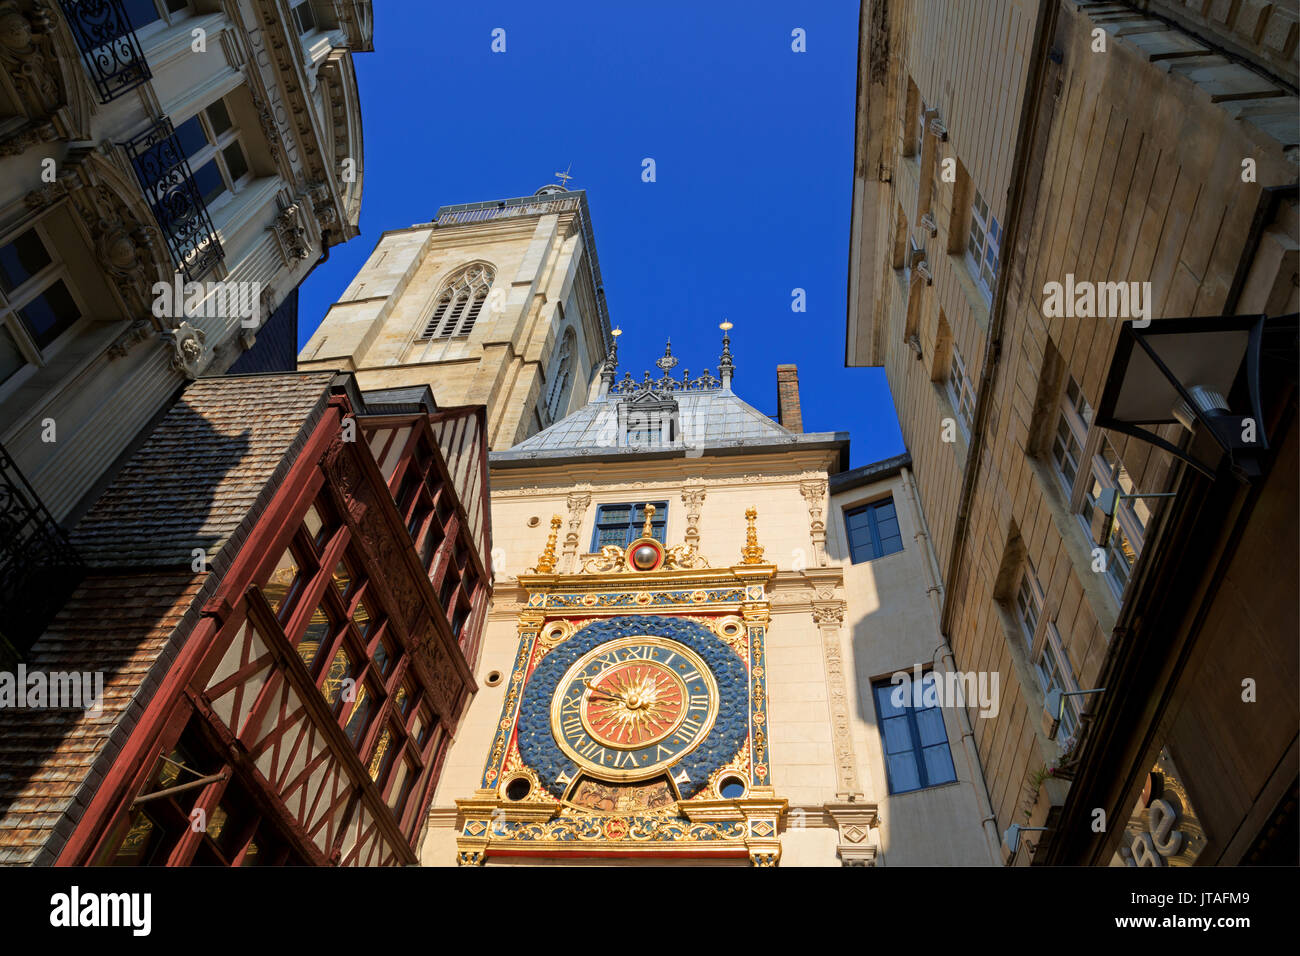 Great Clock, Old Town, Rouen, Normandy, France, Europe Stock Photo